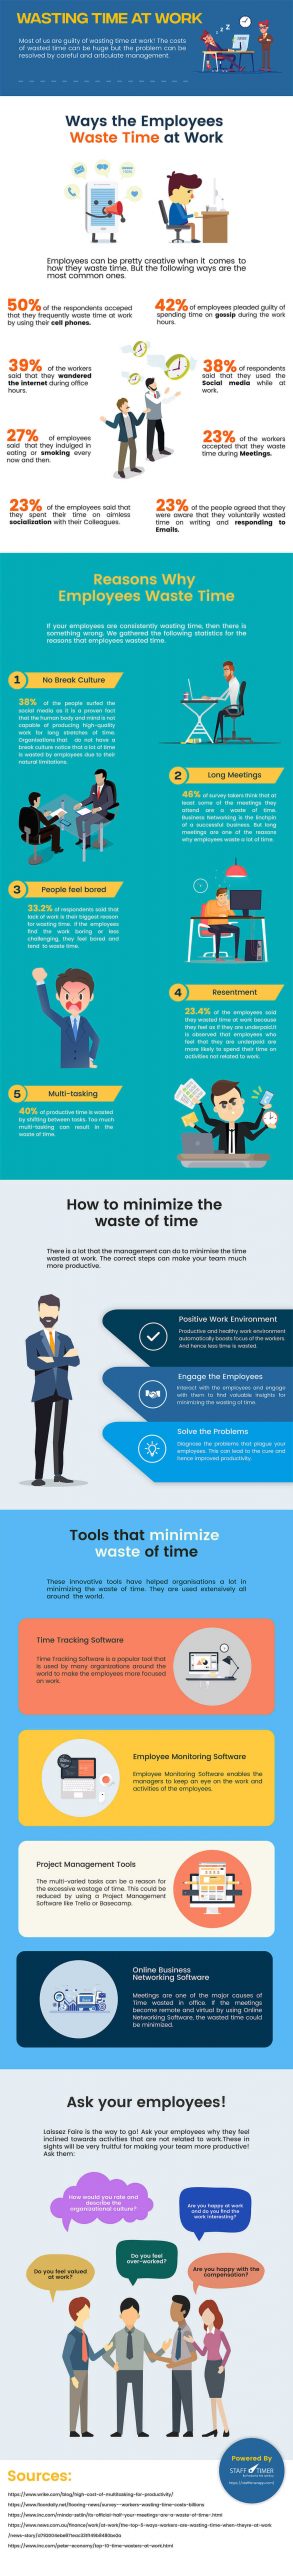 Wasting Time at Work Infographic